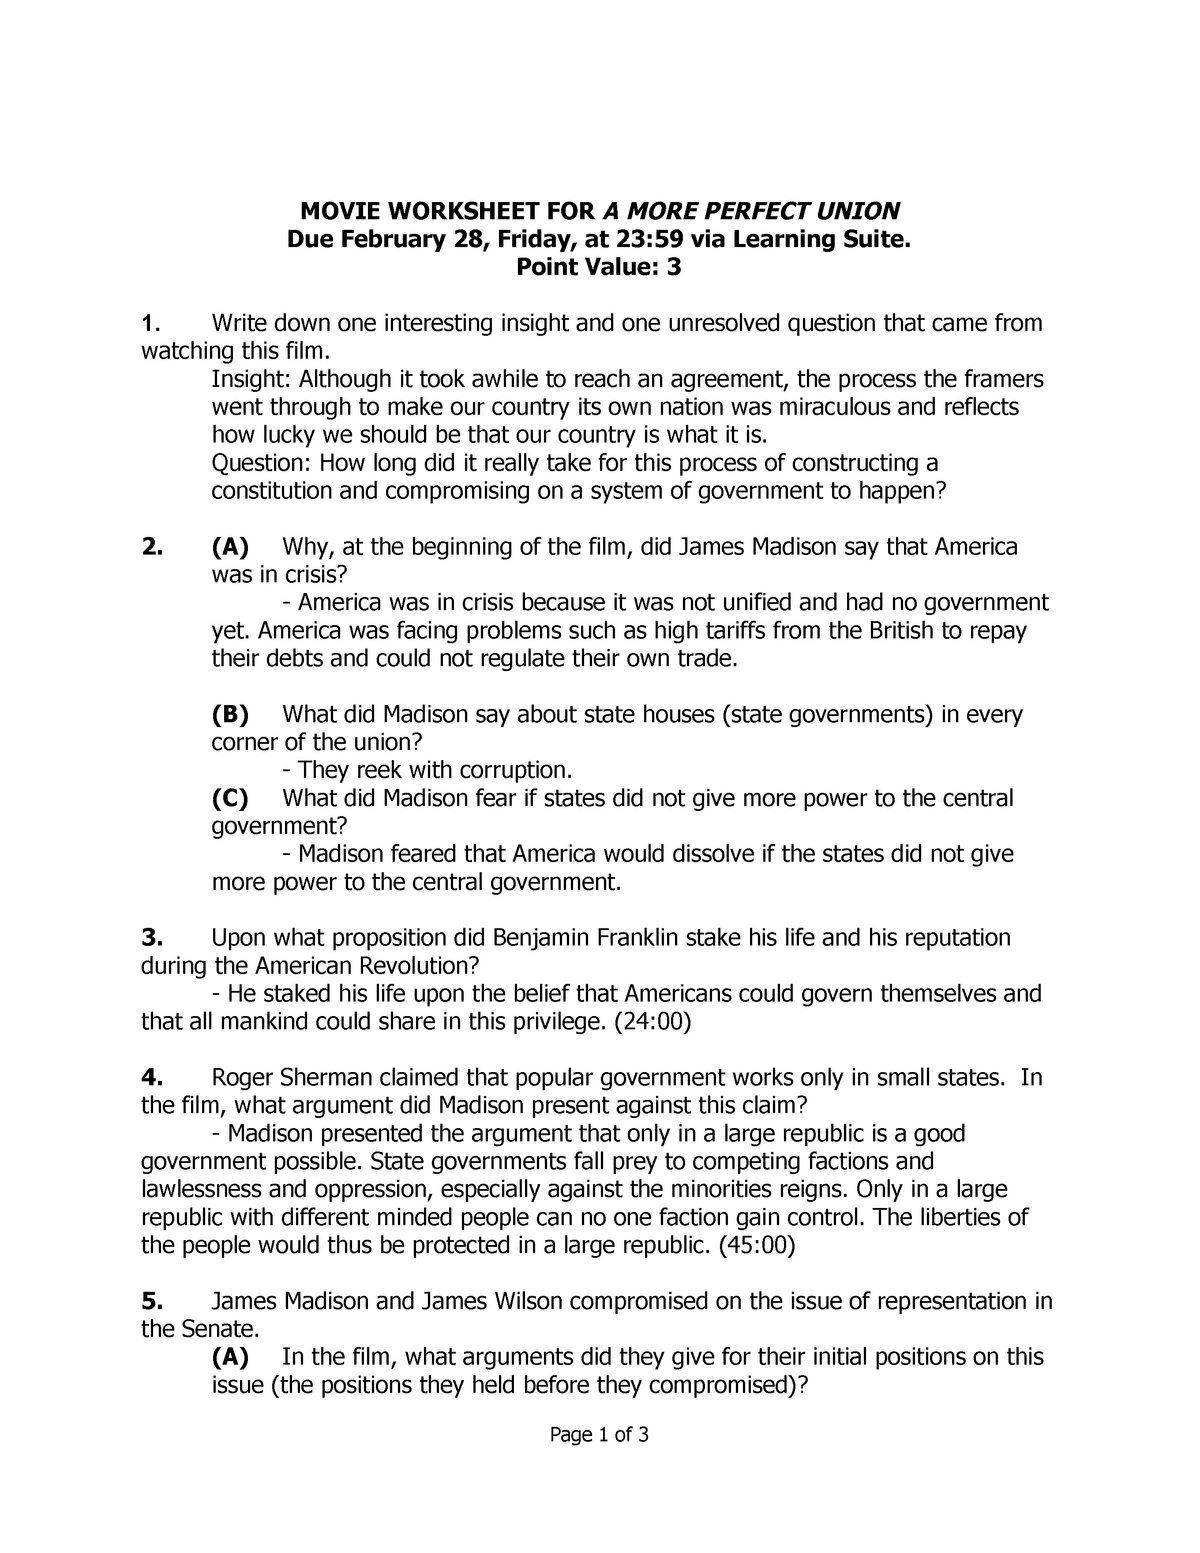 A More Perfect Union Worksheet - A HTG 20 - American Heritage With The Core Movie Worksheet Answers